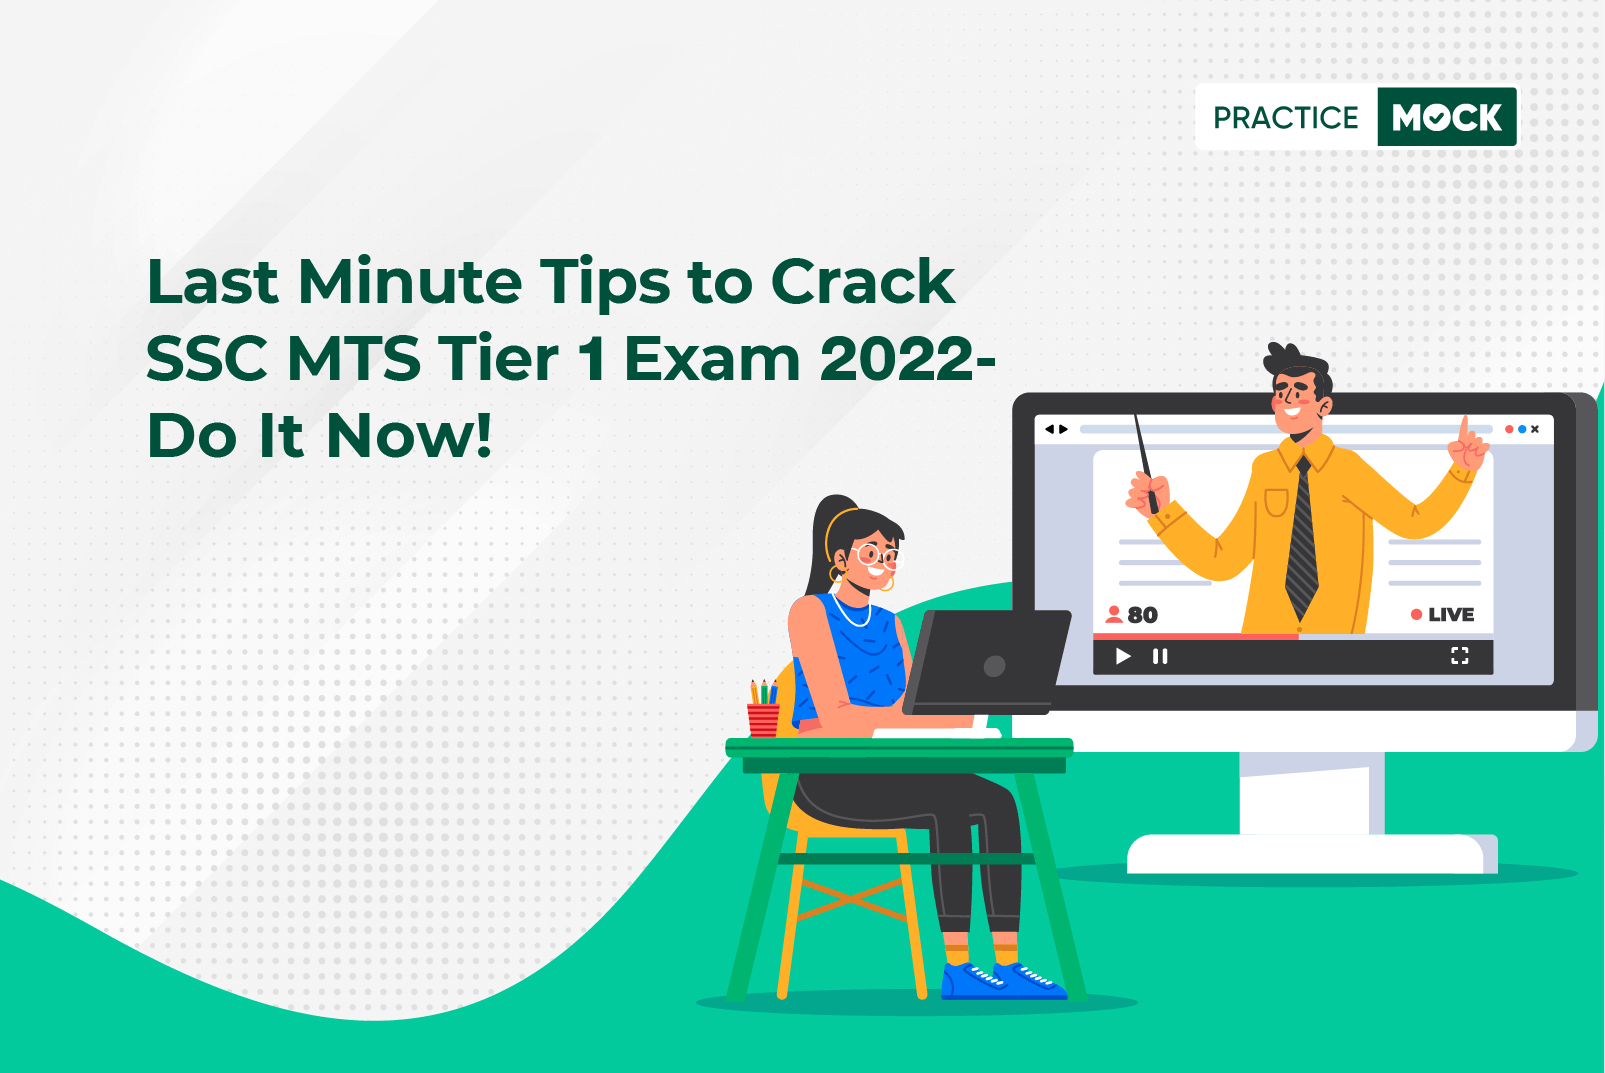 Last Minute Tips to Crack SSC MTS Tier 1 Exam 2022